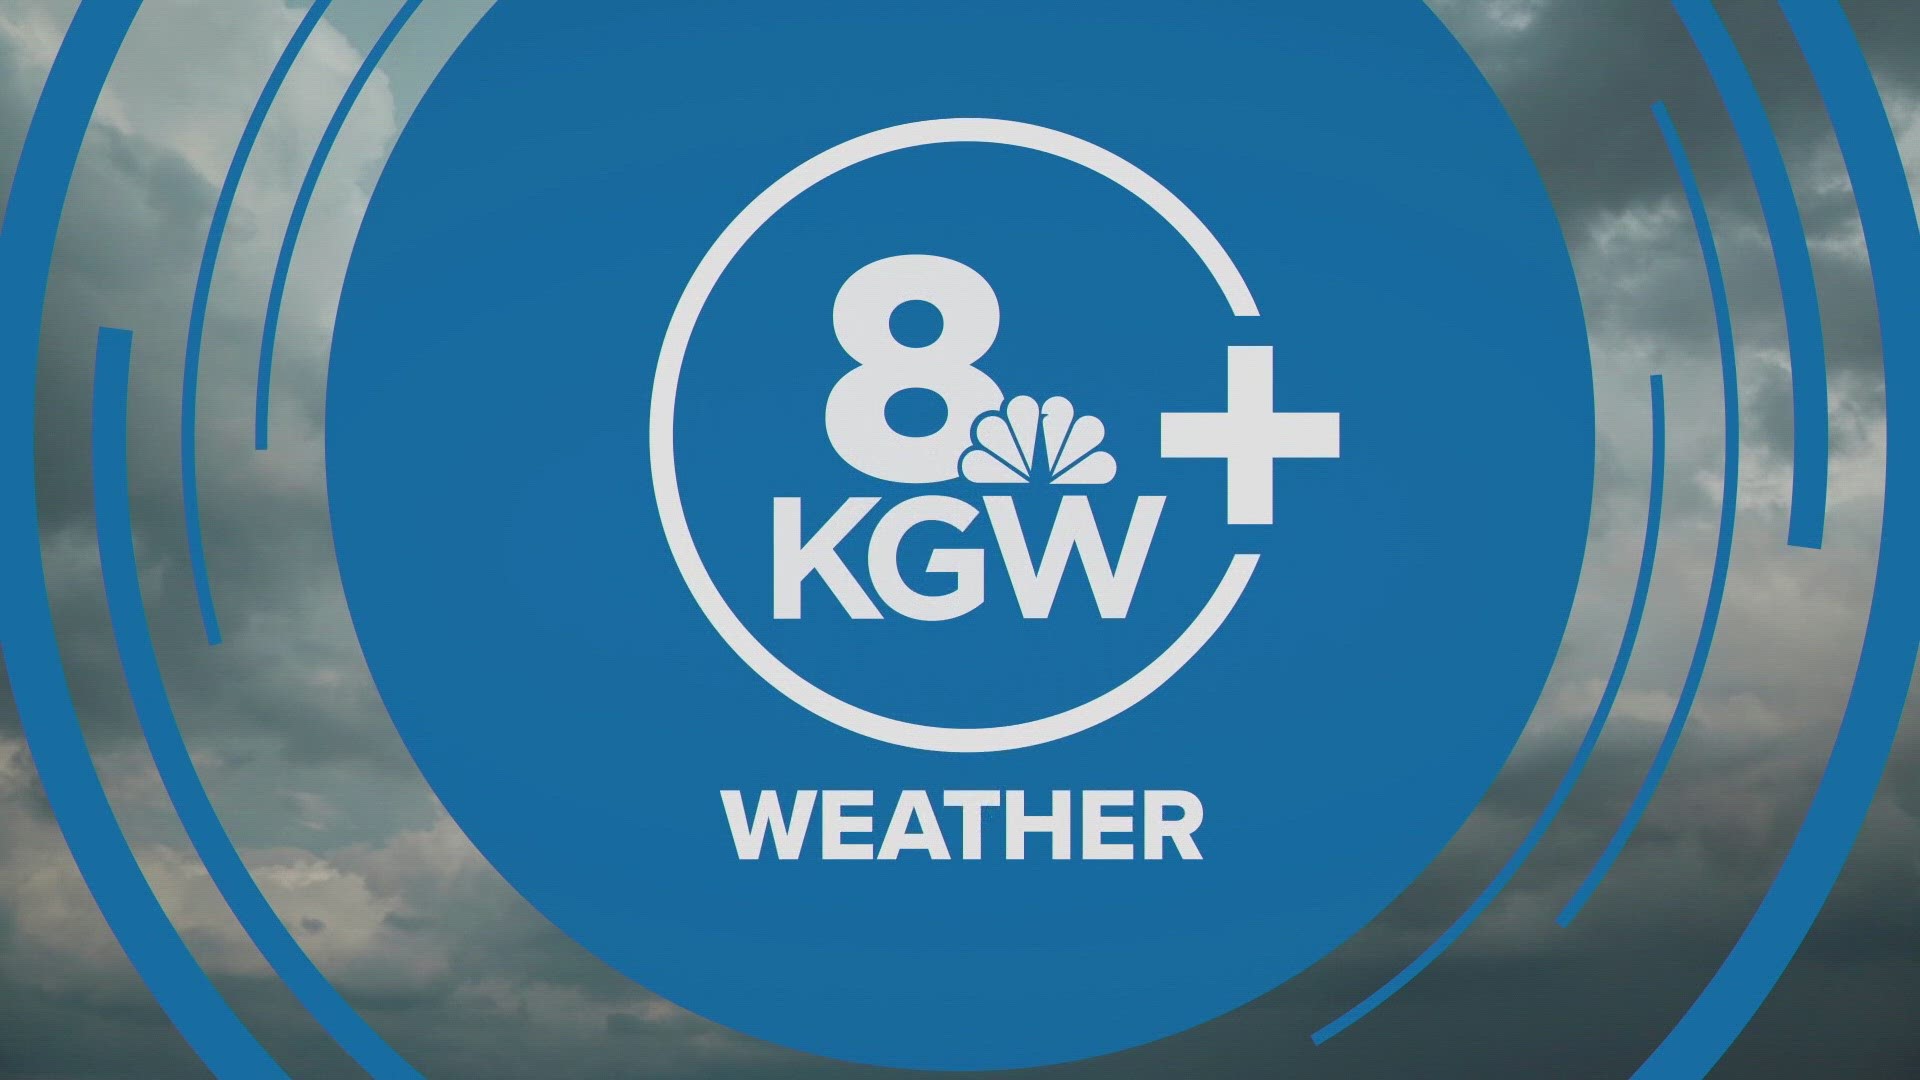 KGW has issued Weather Impact Alert Days for July 4-7. Temperatures are expected to hit or surpass 100 on July 5, 6 and 7.